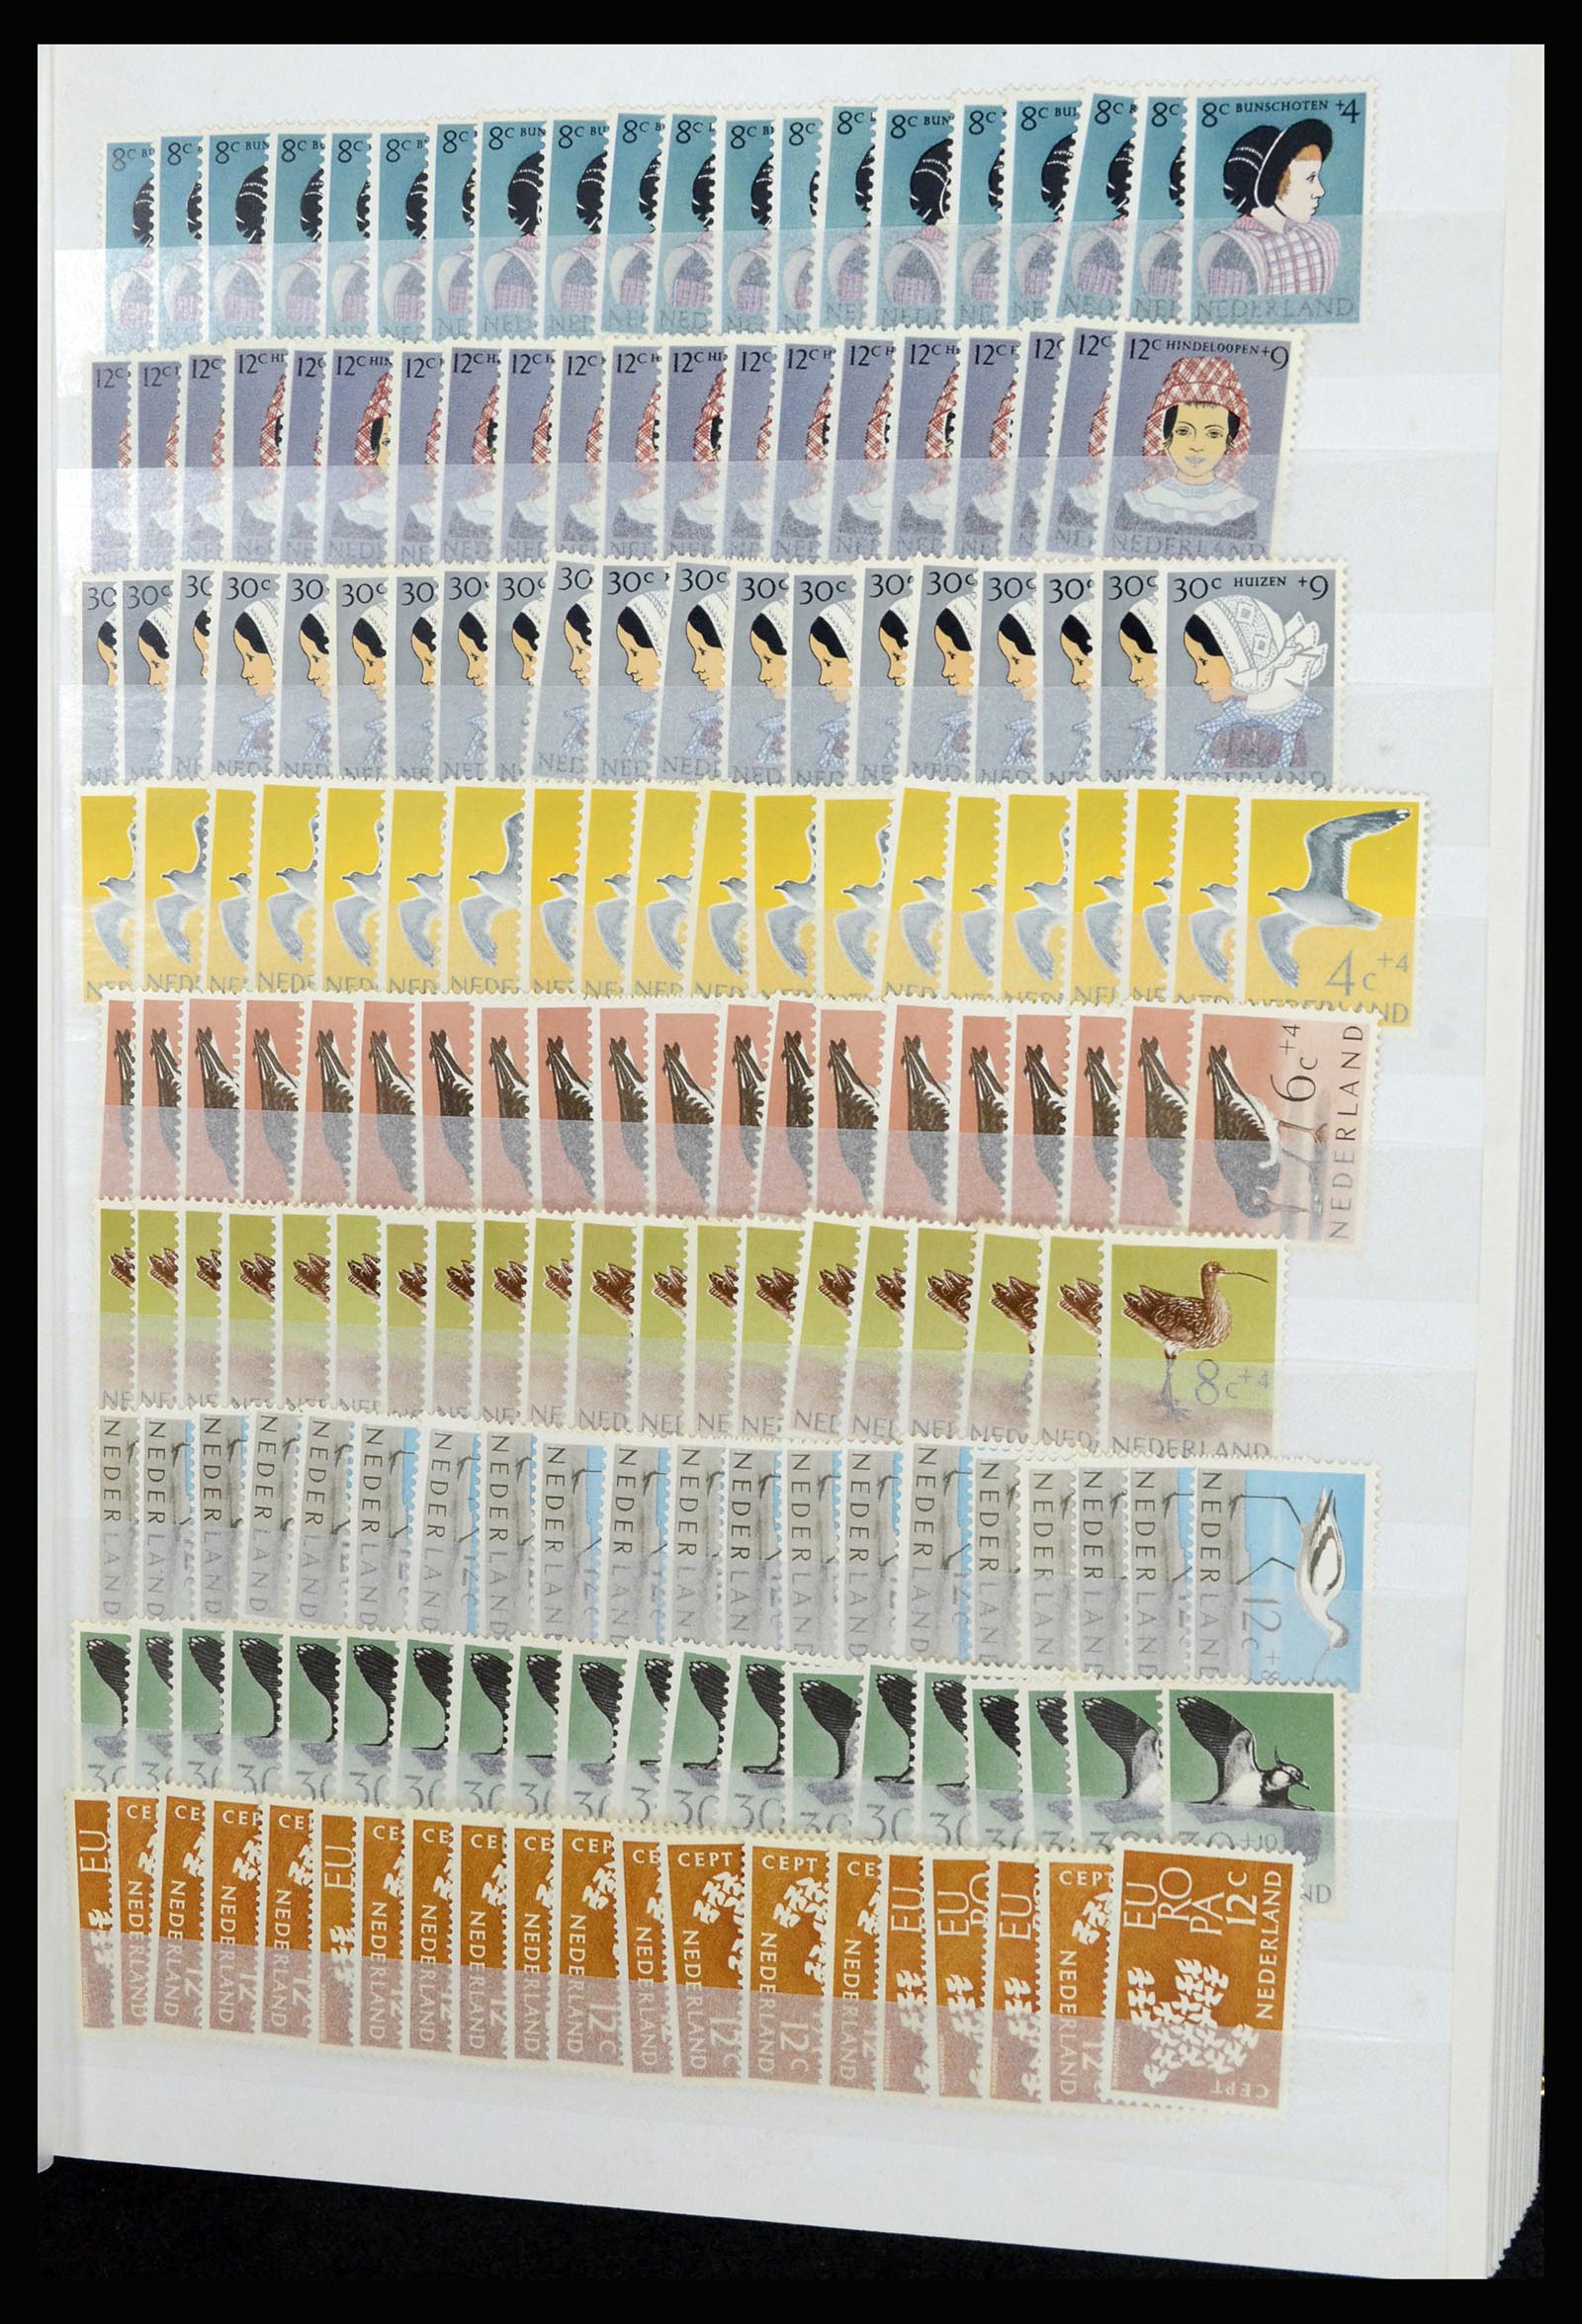 37043 005 - Stamp collection 37043 Netherlands 1958-1974.